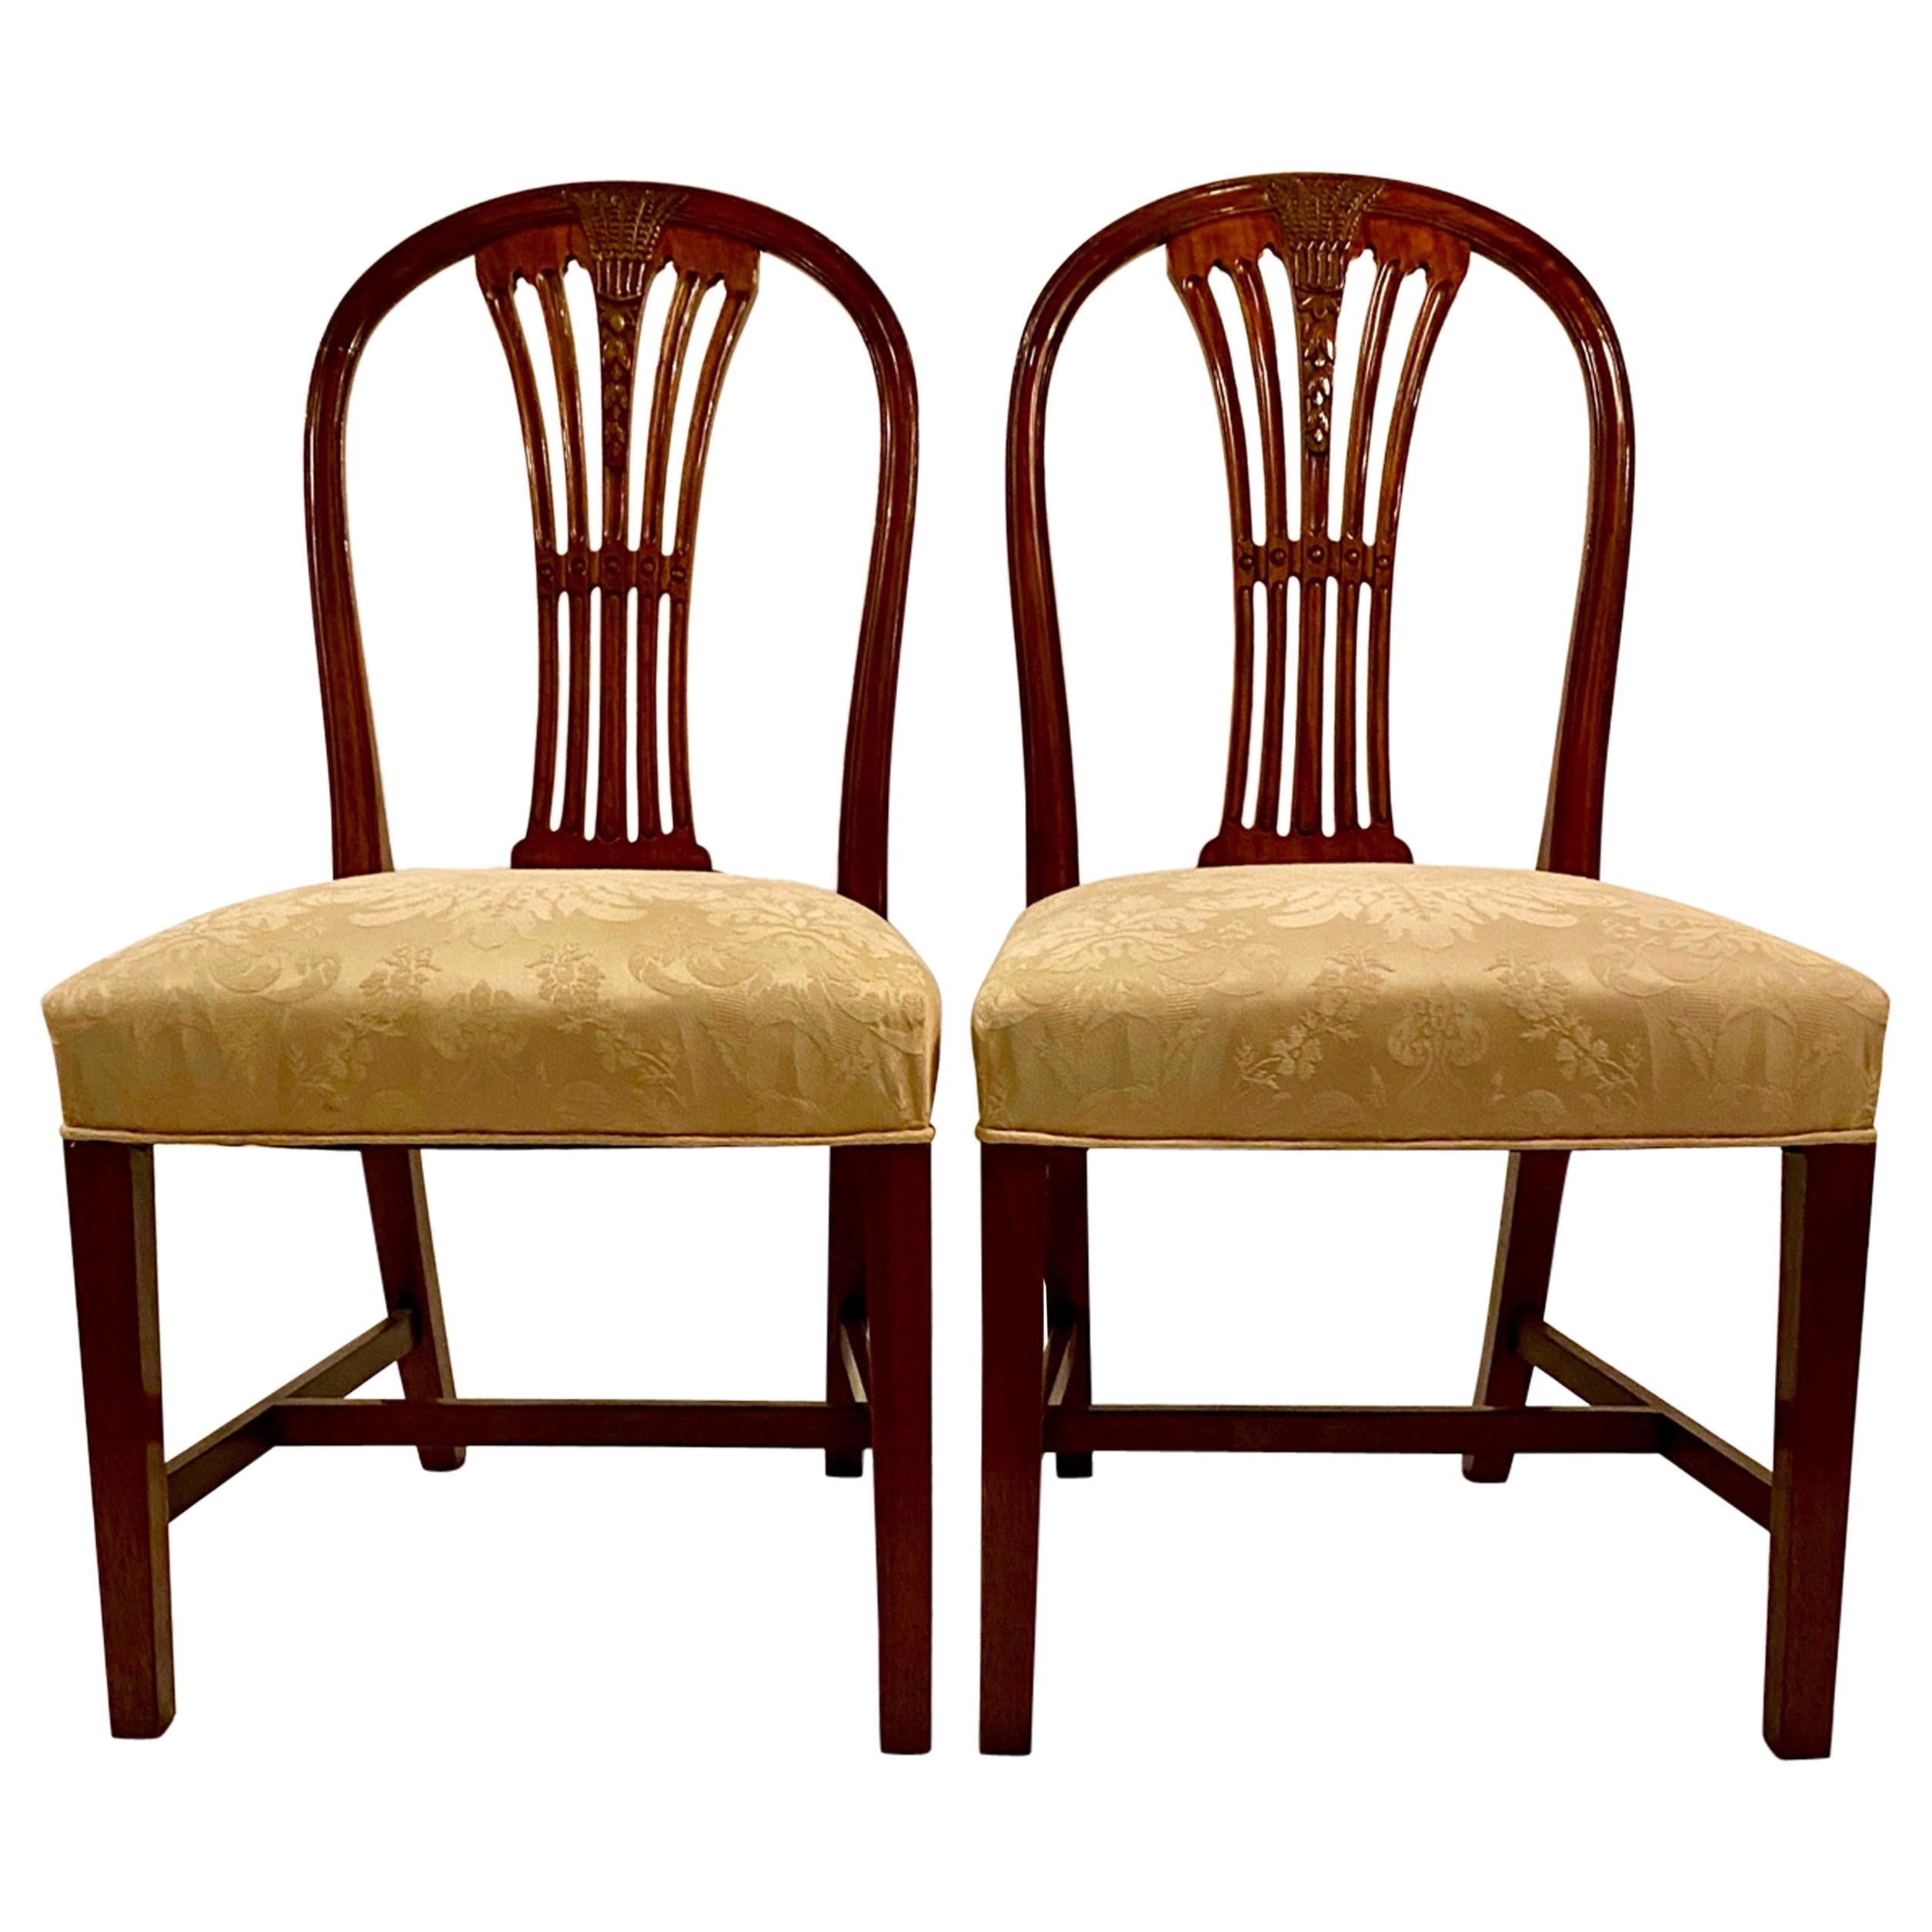 Pair of Antique English Mahogany Late 19th Century Side Chairs